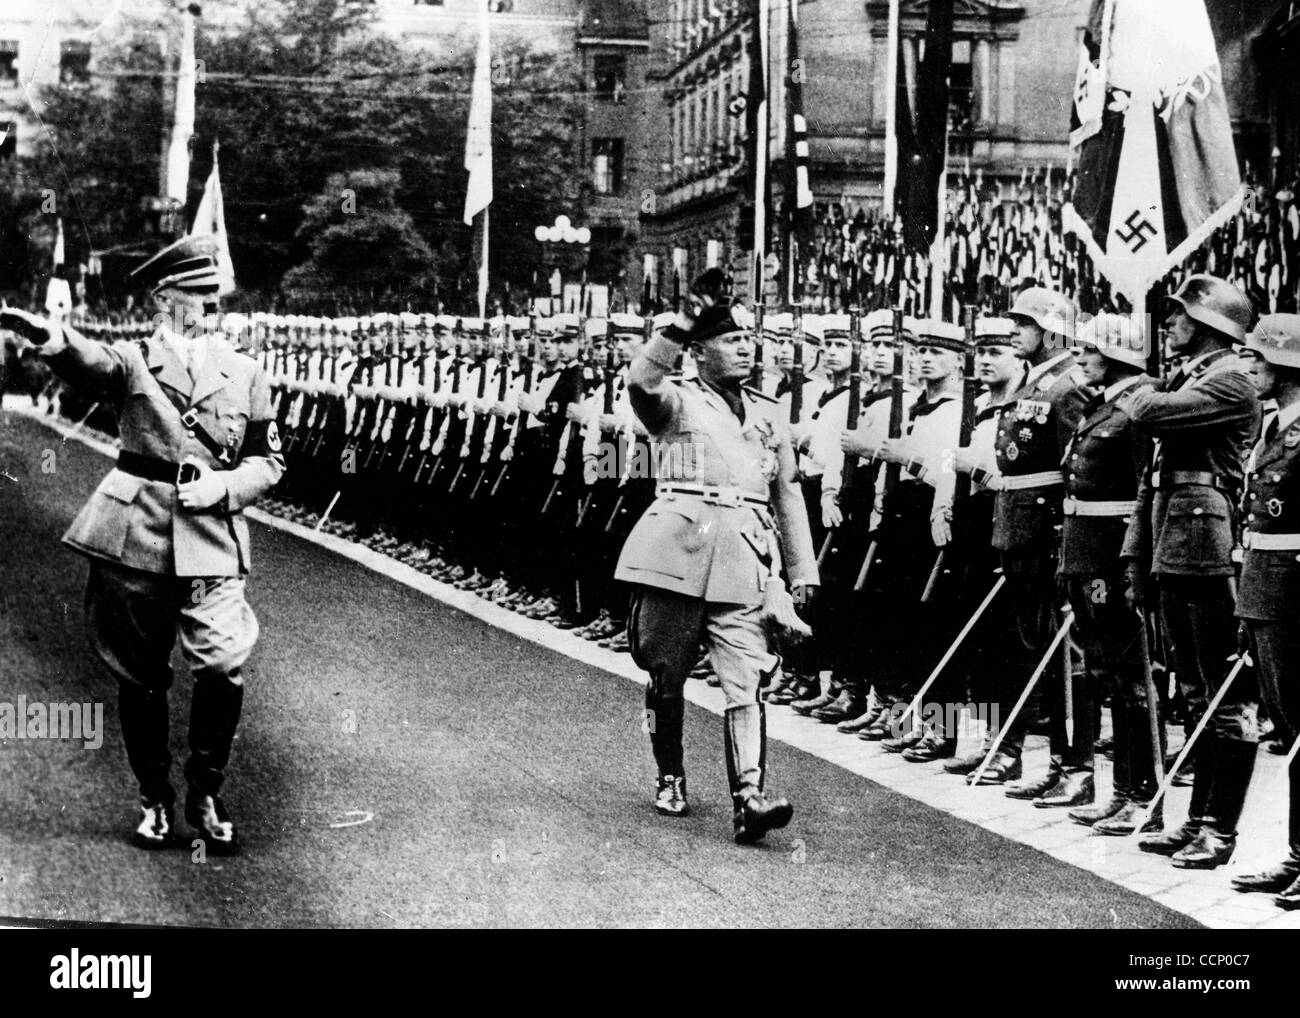 June 10, 1940 - Berlin, Germany - ADOLF HITLER and BENITO MUSSOLINI inspecting military and navel guards. Adolf Hitler (April 20, 1889 - April 30, 1945) was the Fuhrer and Reichskanzler (Leader and Imperial chancellor) of Germany from 1933 to his death. He was leader of the National Socialist German Stock Photo